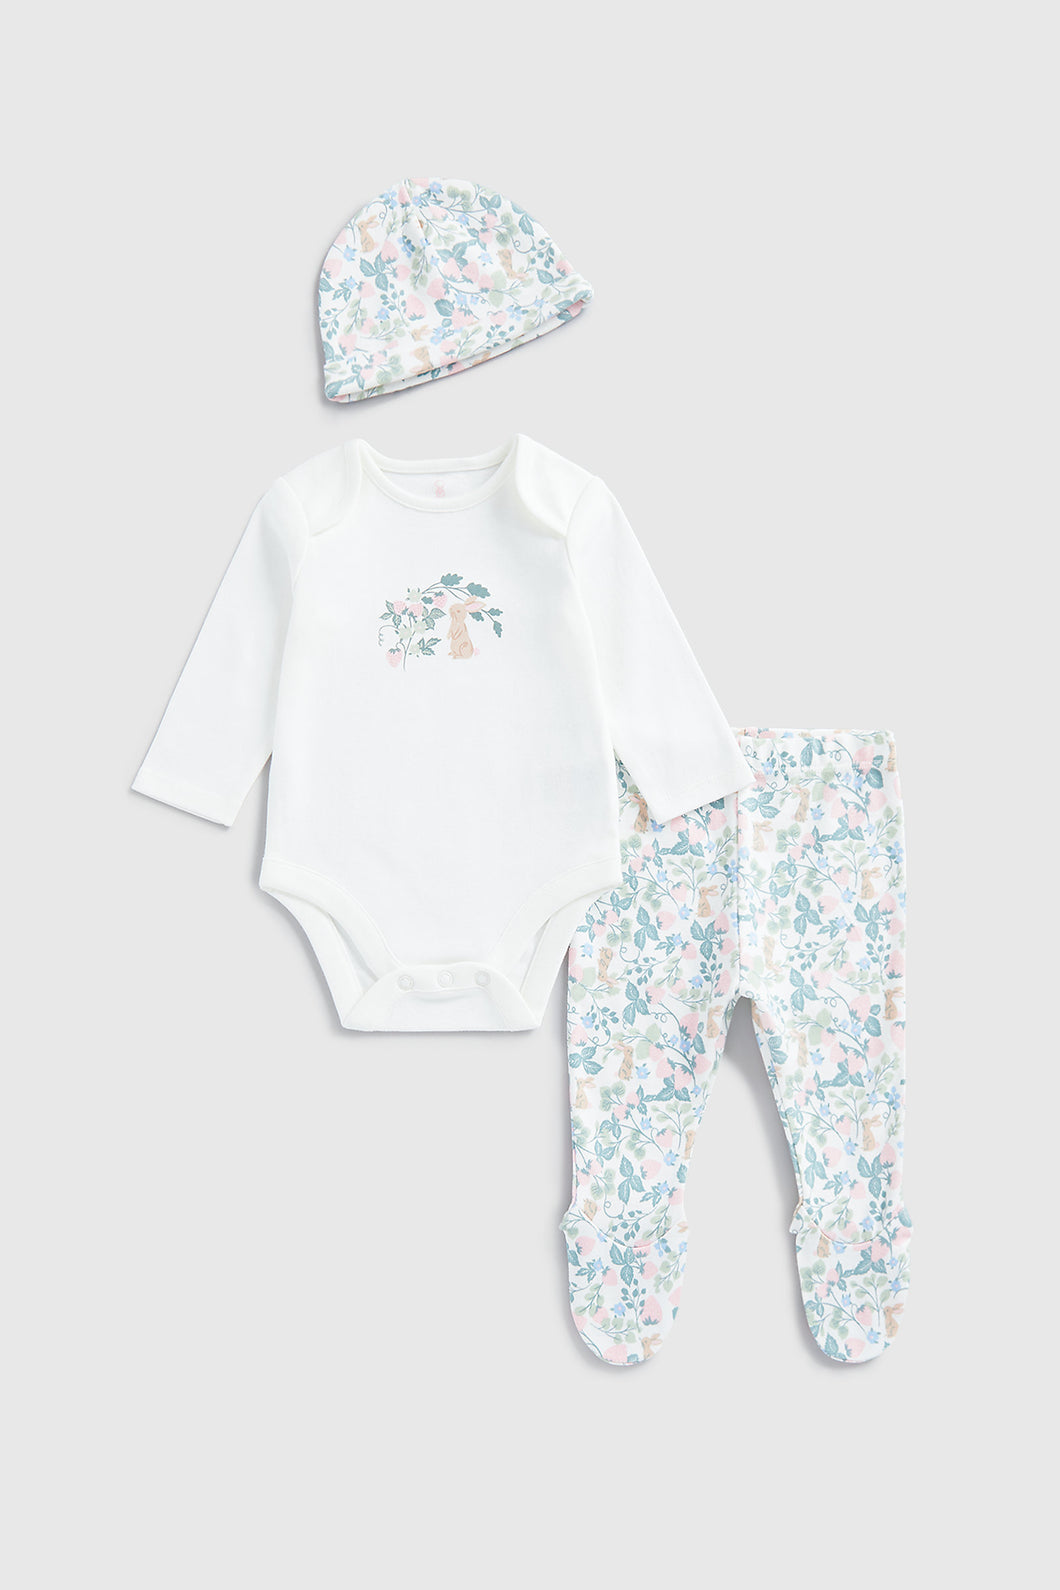 Mothercare Strawberry 3-Piece Baby Outfit Set